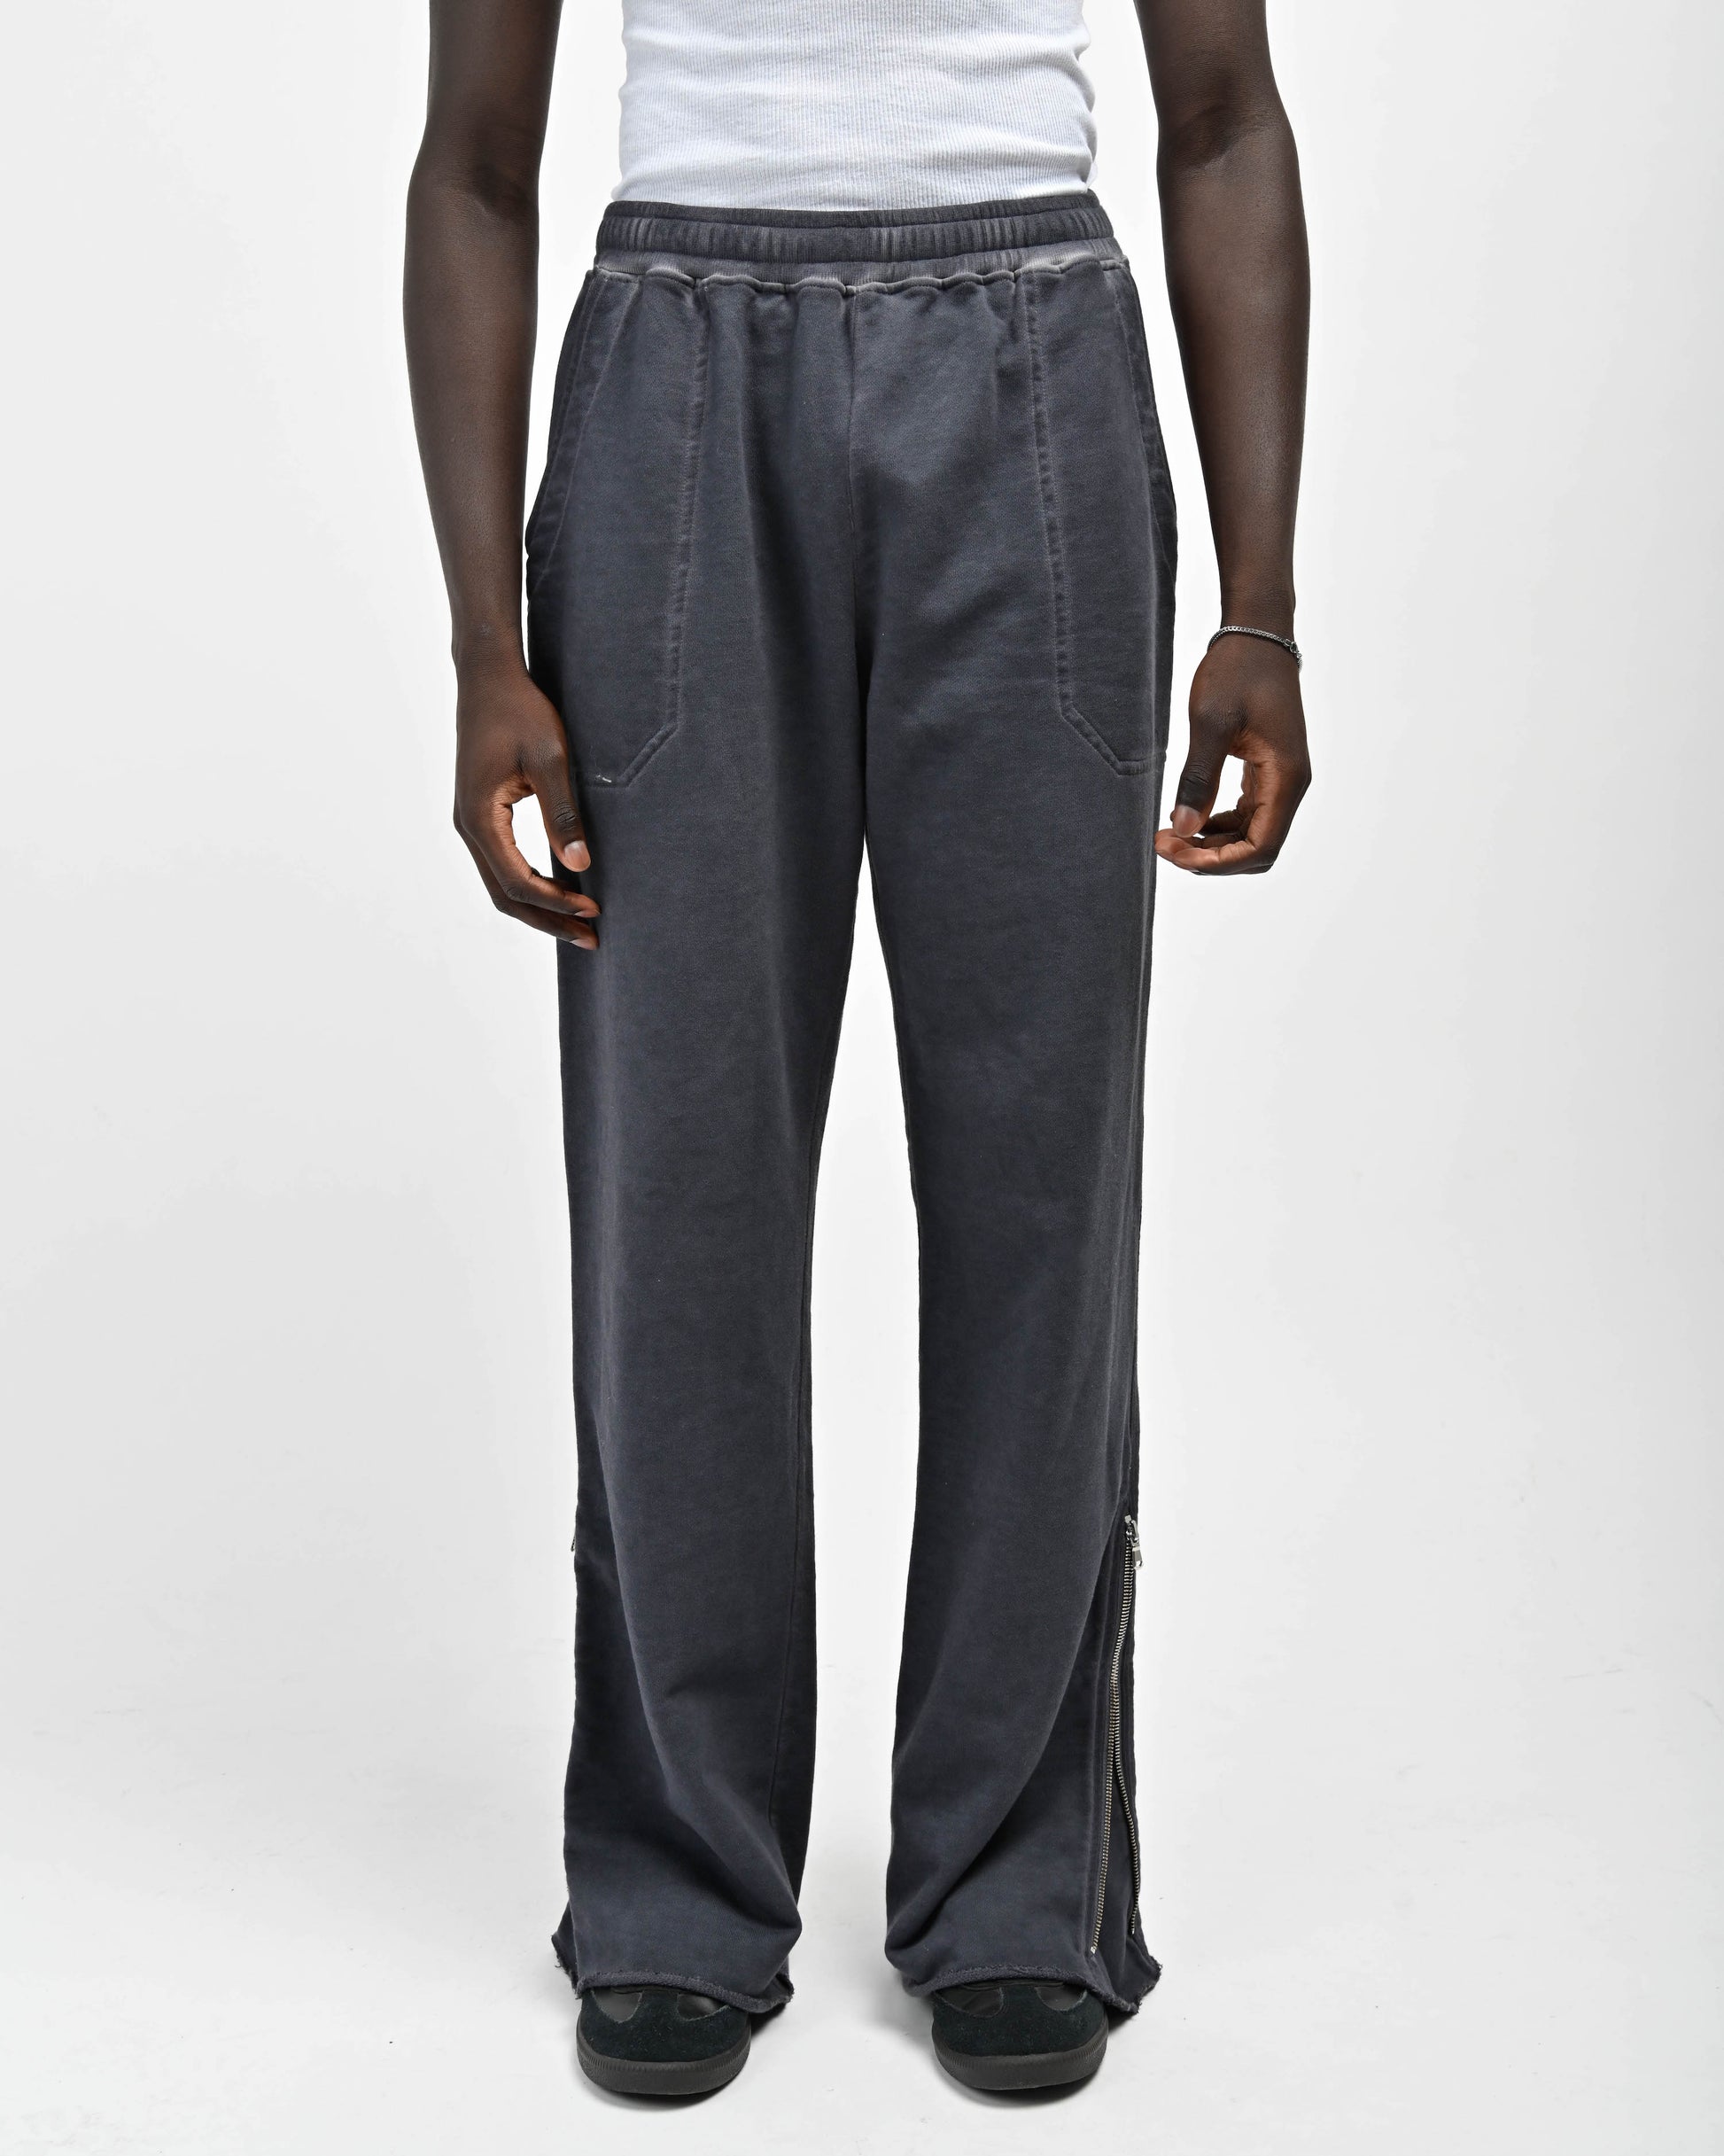 Front View of Allora Track Pants by Aseye Studio 